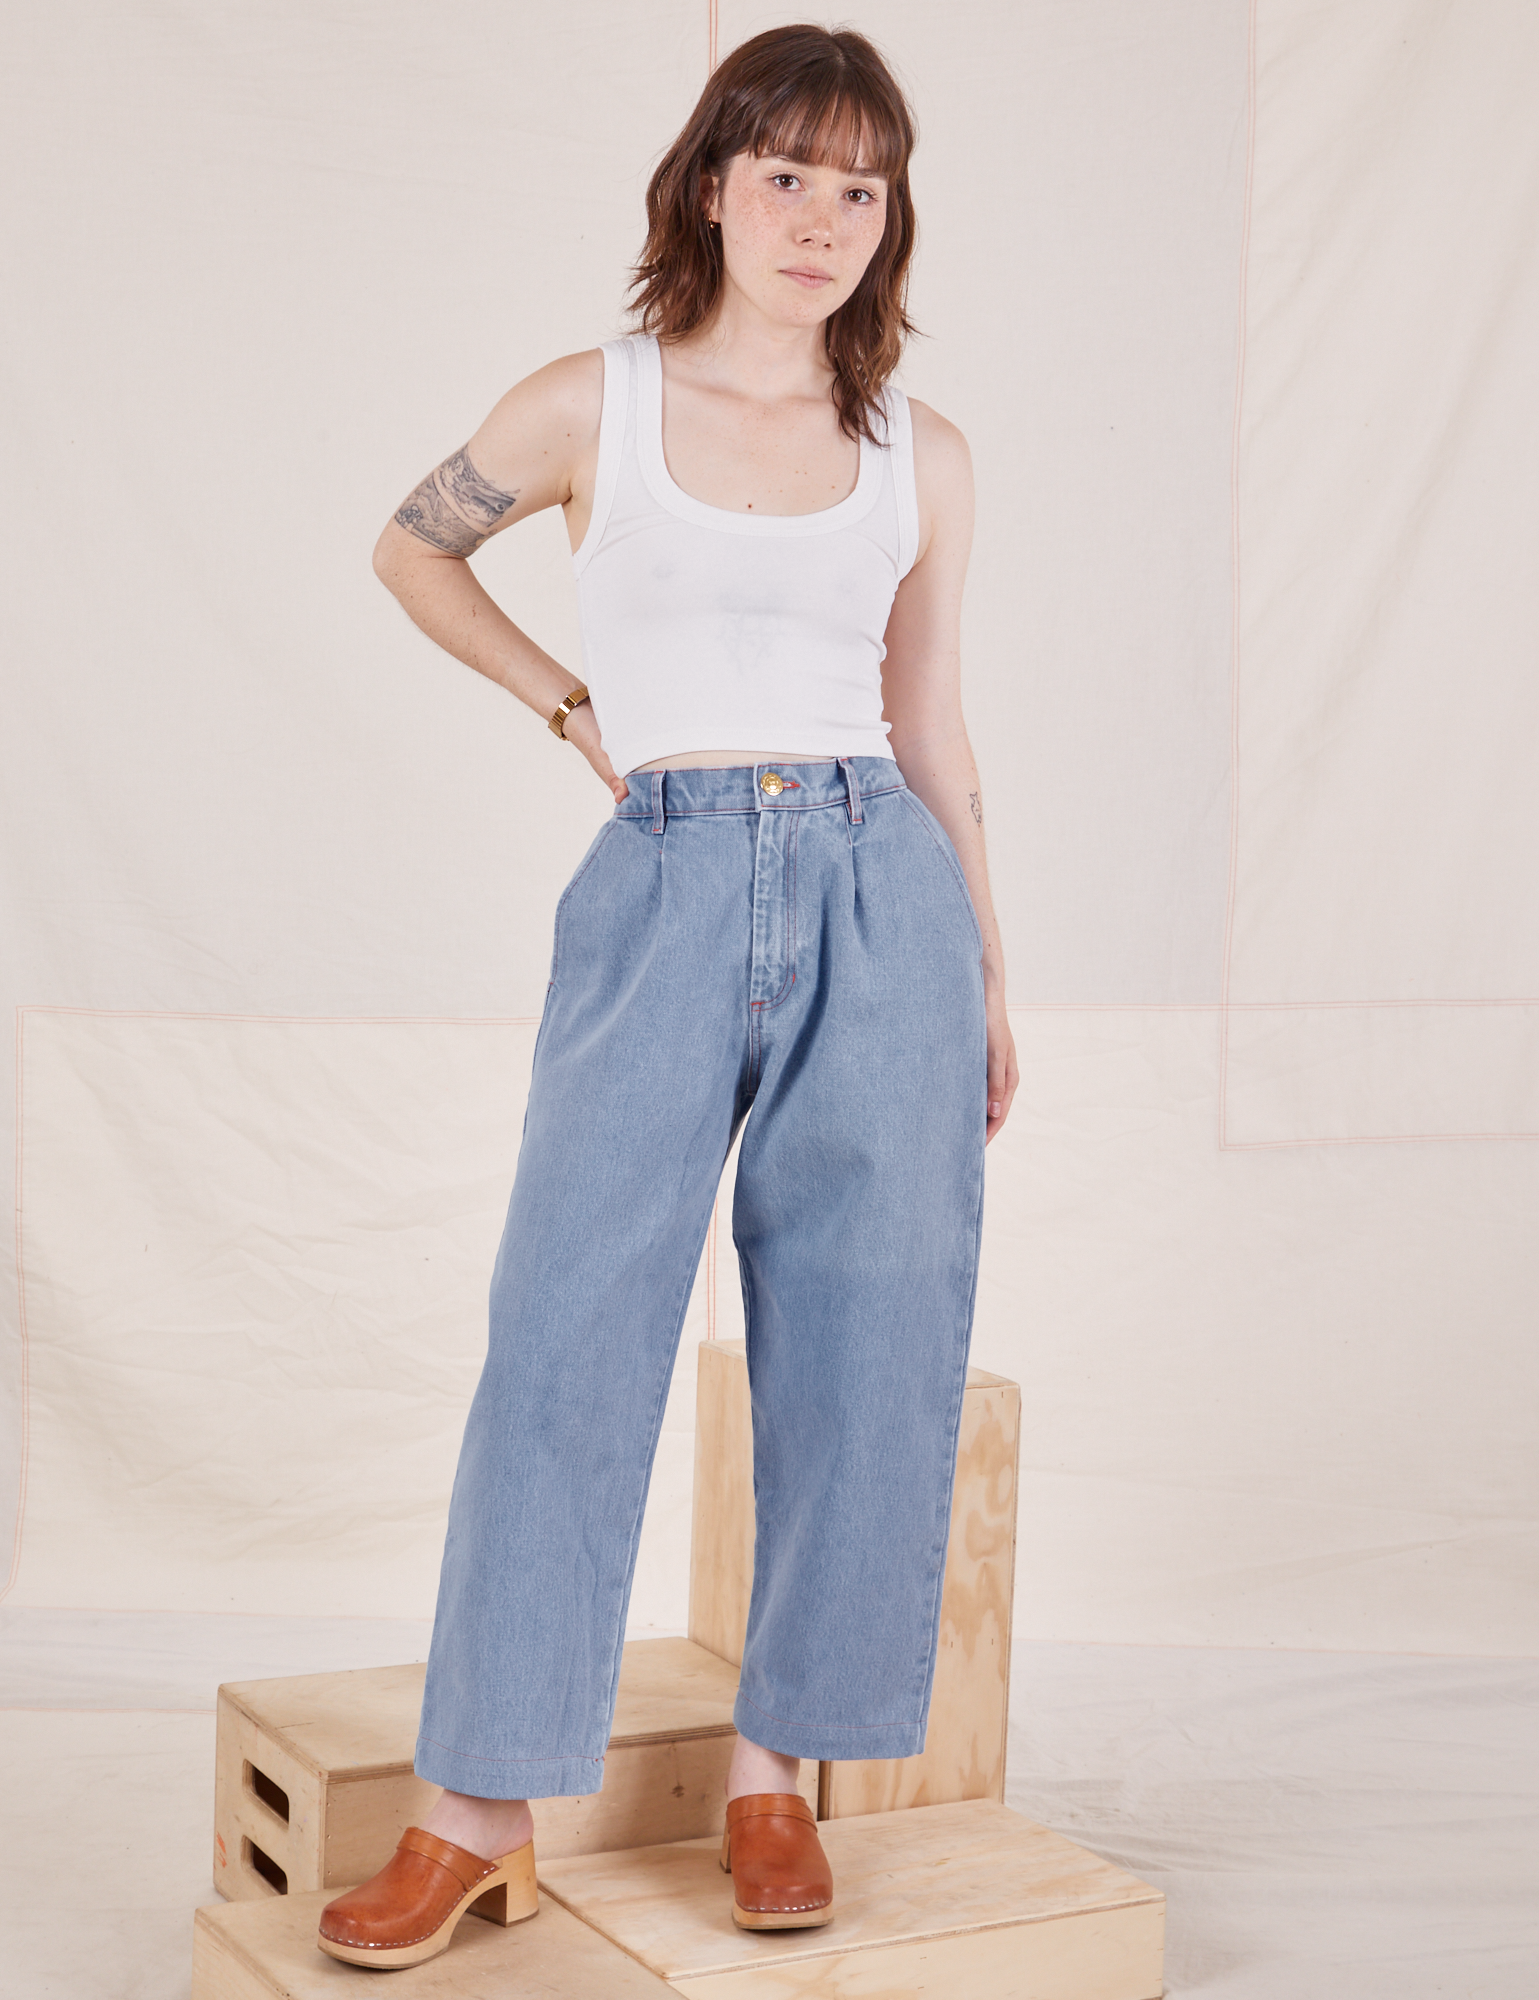 Women Cotton Jeans|Stylish/Latest 5 Button|Ankle Length|Fringes||Daily  use/wear|Stretchable Pant/Trouser|HIGH Waist/Rise|Size 28-34|fashion looks  Women's Slim Fit 5 Button Denim Jeans | High Waist Ankle Length Jeans |  Stretchable Five Button High Rise ...